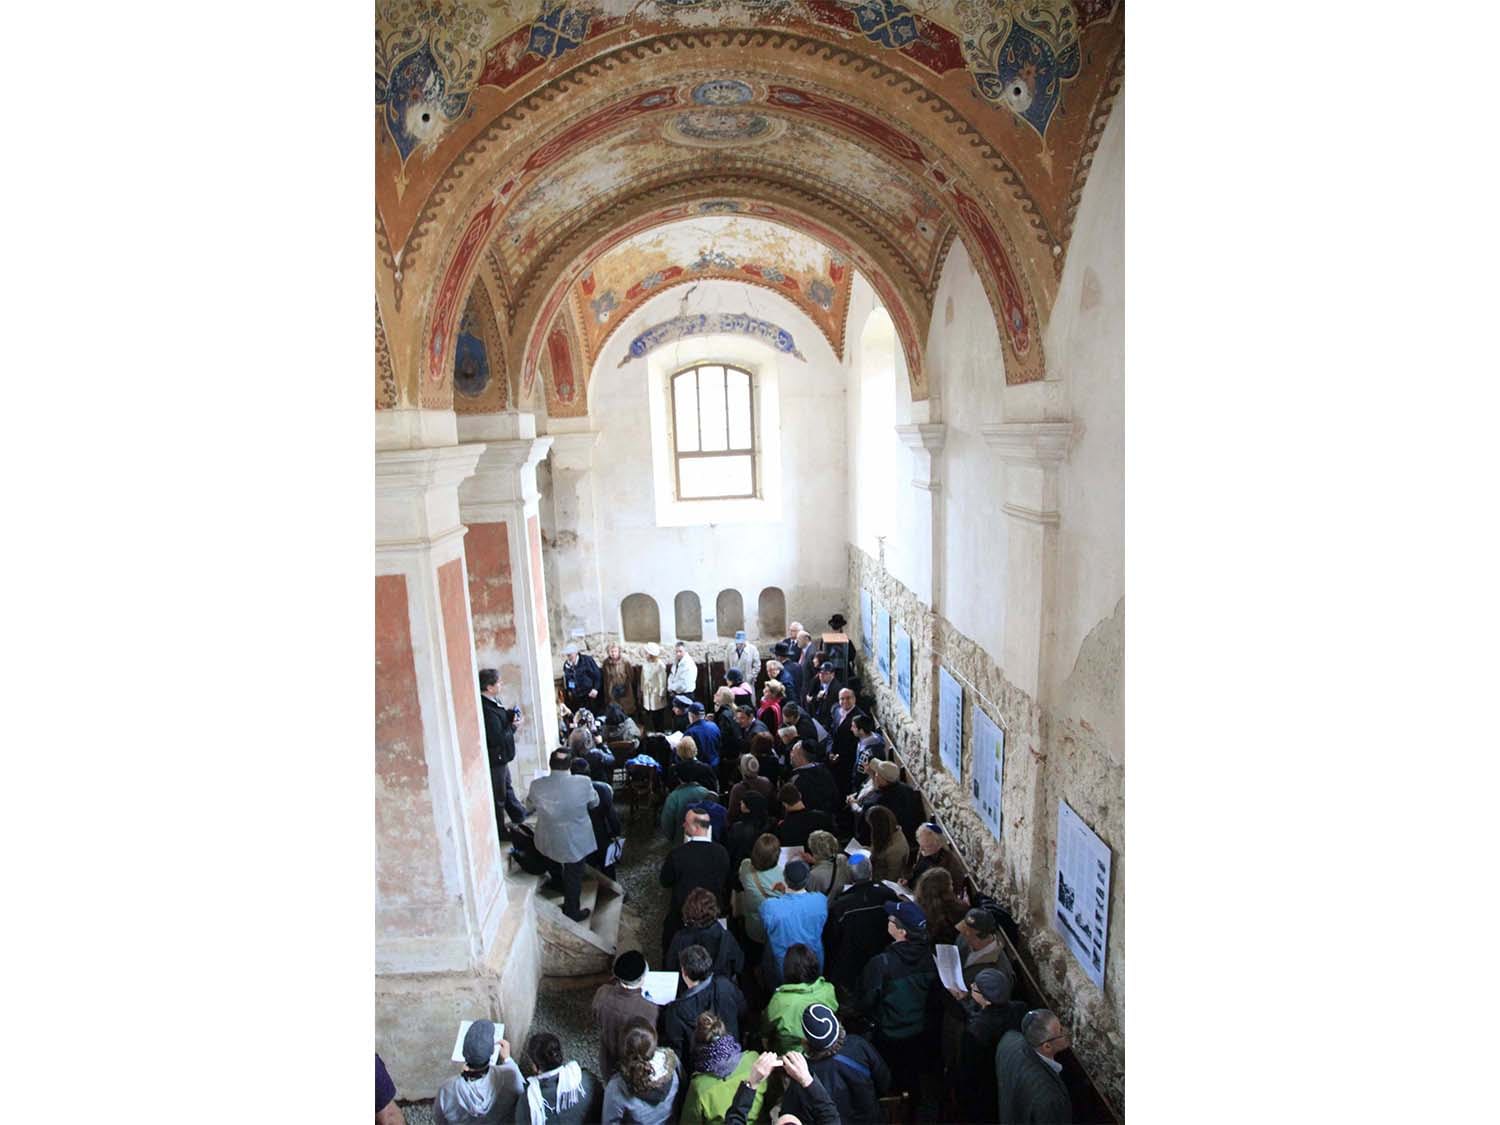 May 2012 Commemoration Gathering in Bardejov Old Synagogue